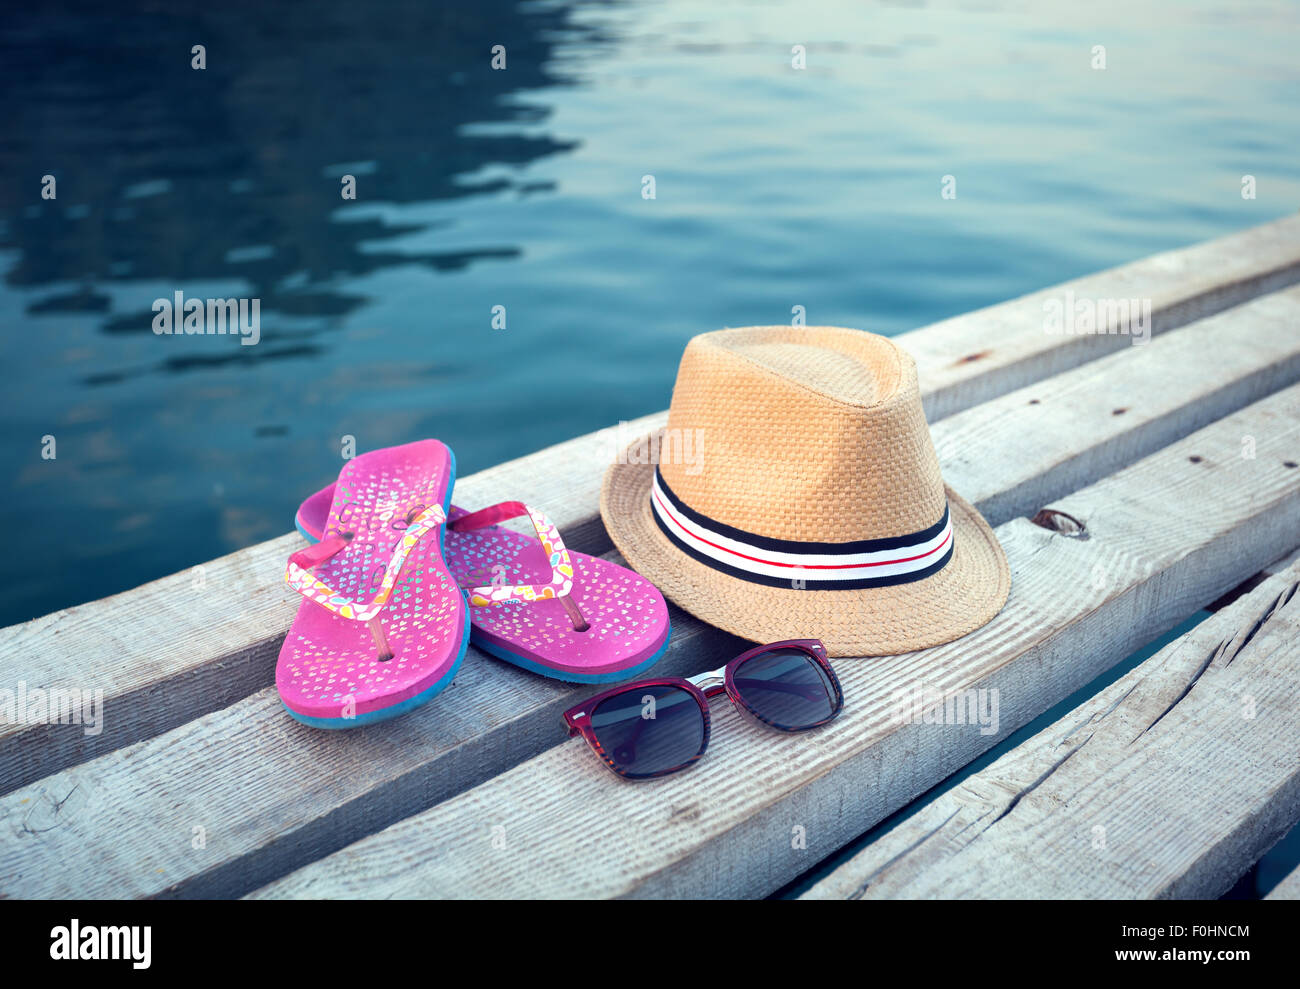 Sunglasses, flip-flops and hat on the wooden texture in summer. Stock Photo